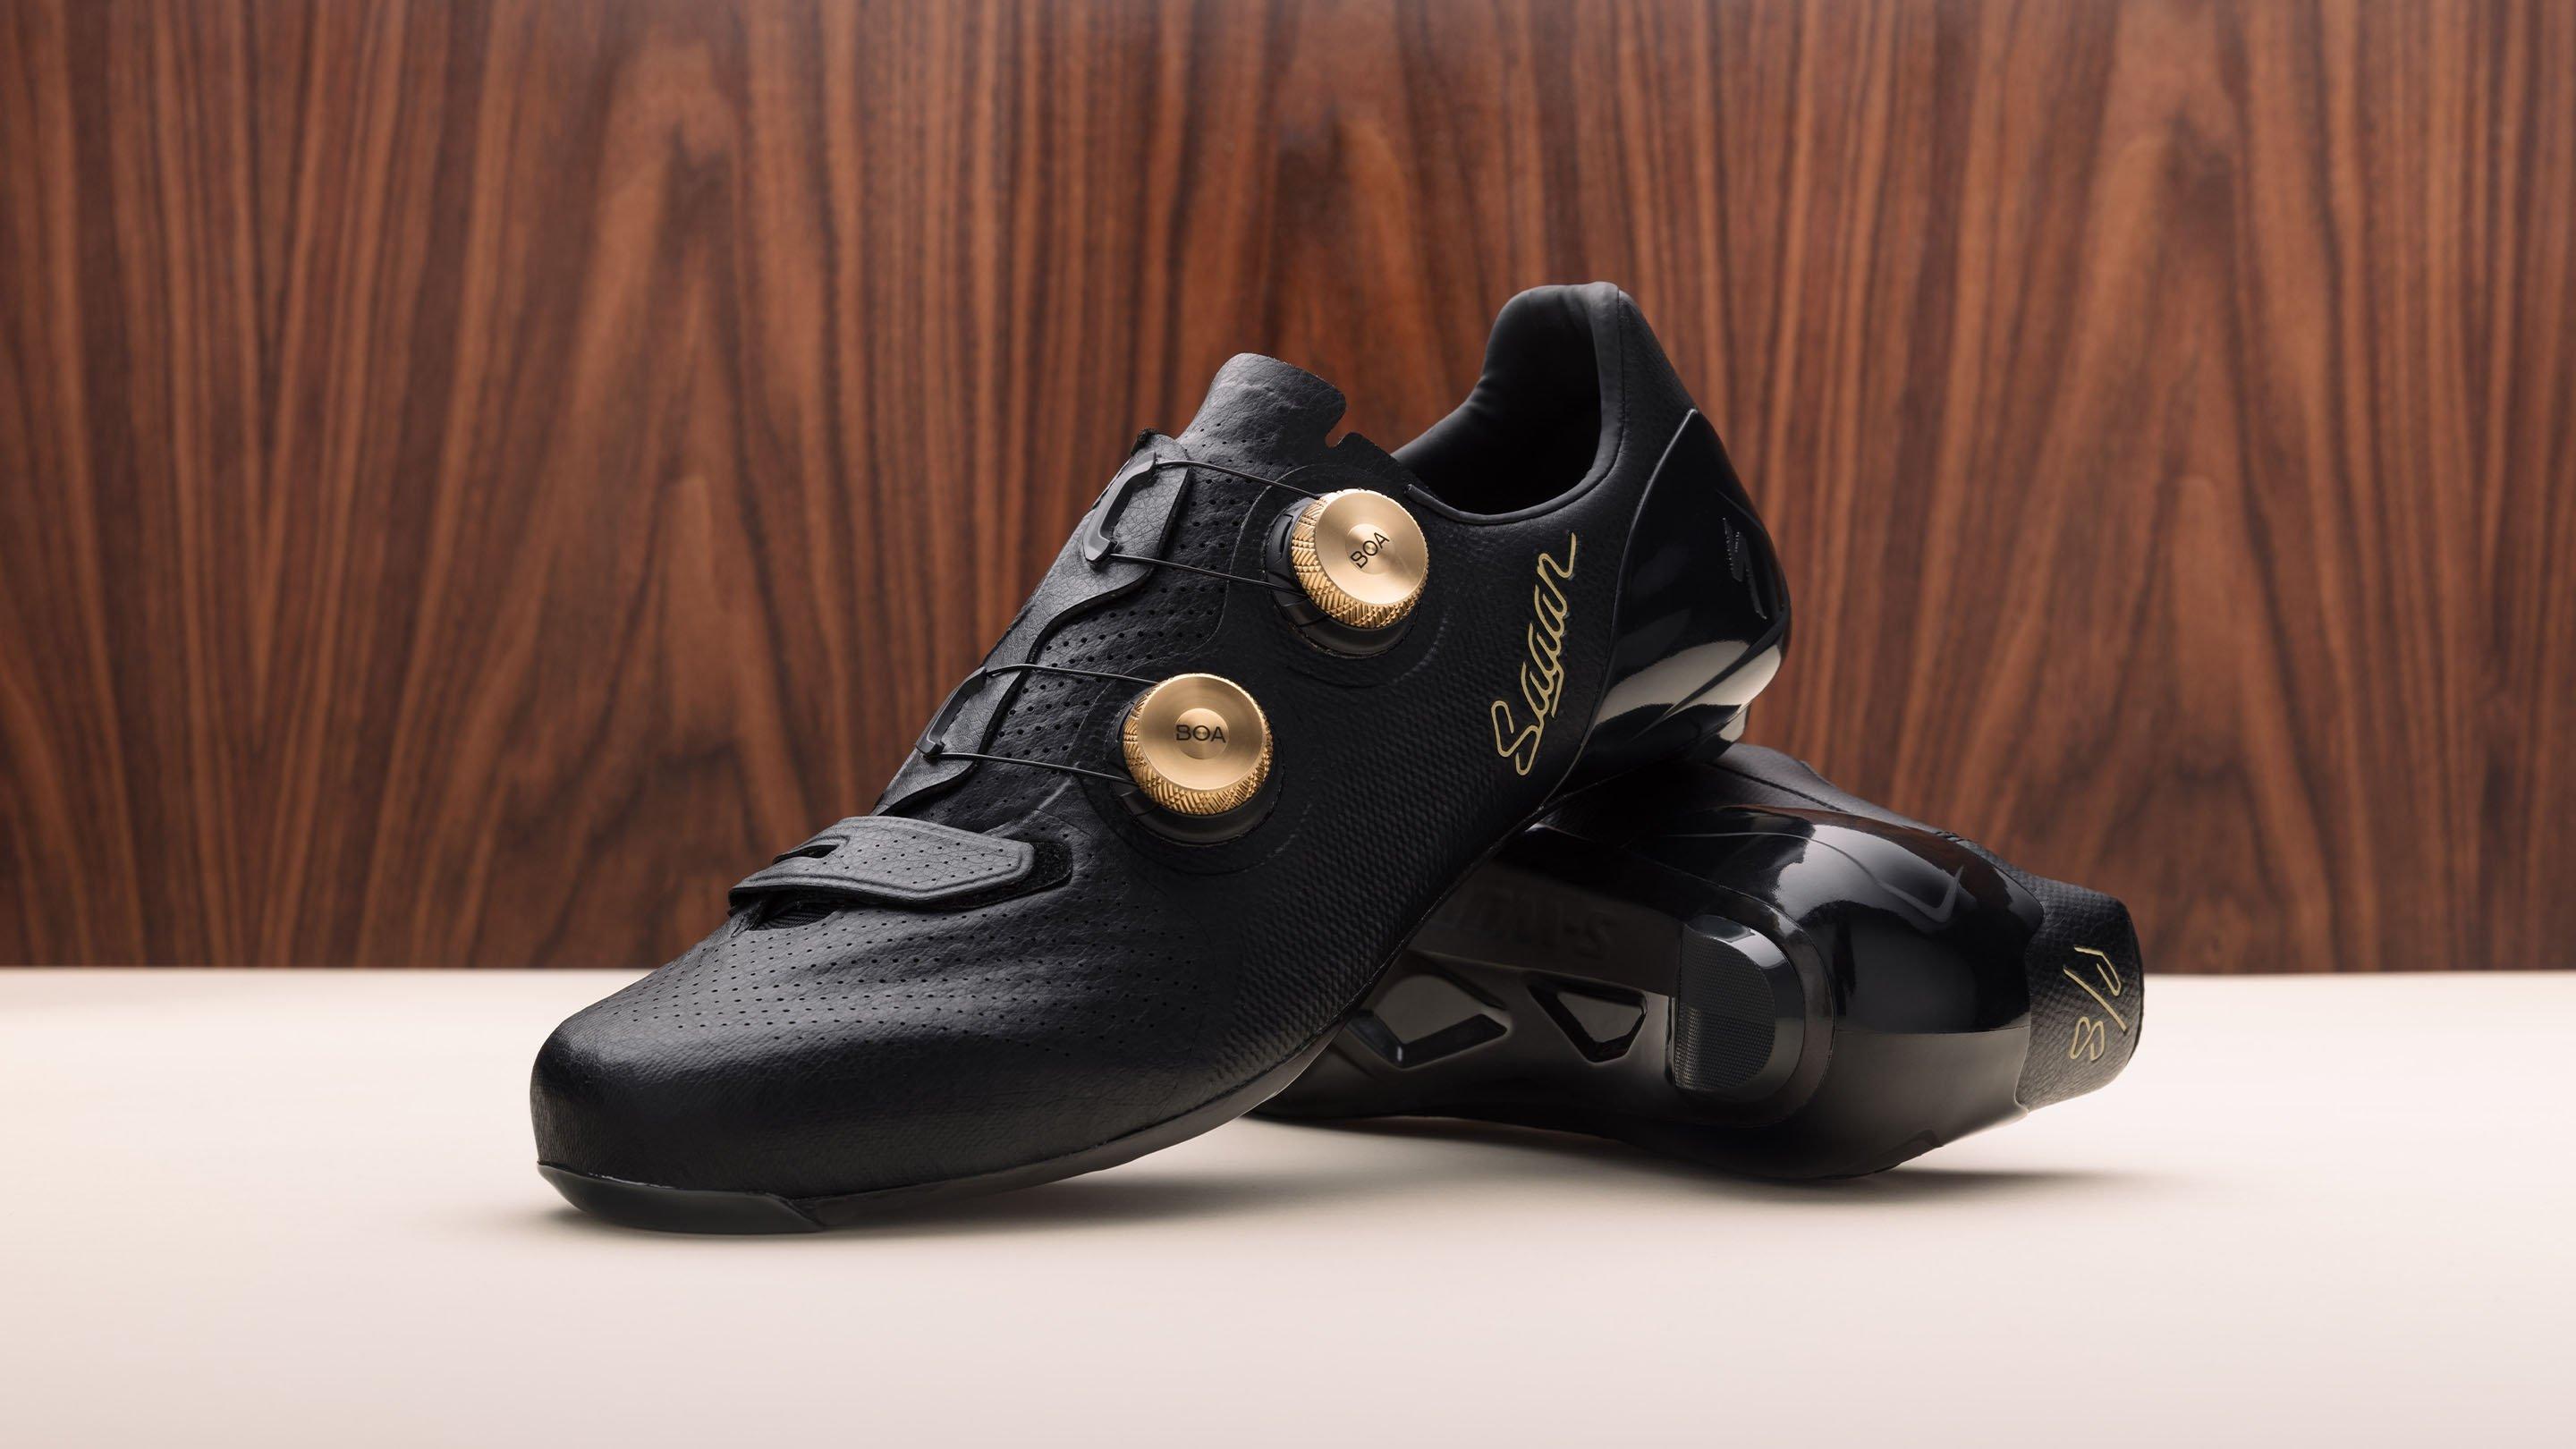 S-Works 7 Road Shoes - Sagan Collection: Disruption